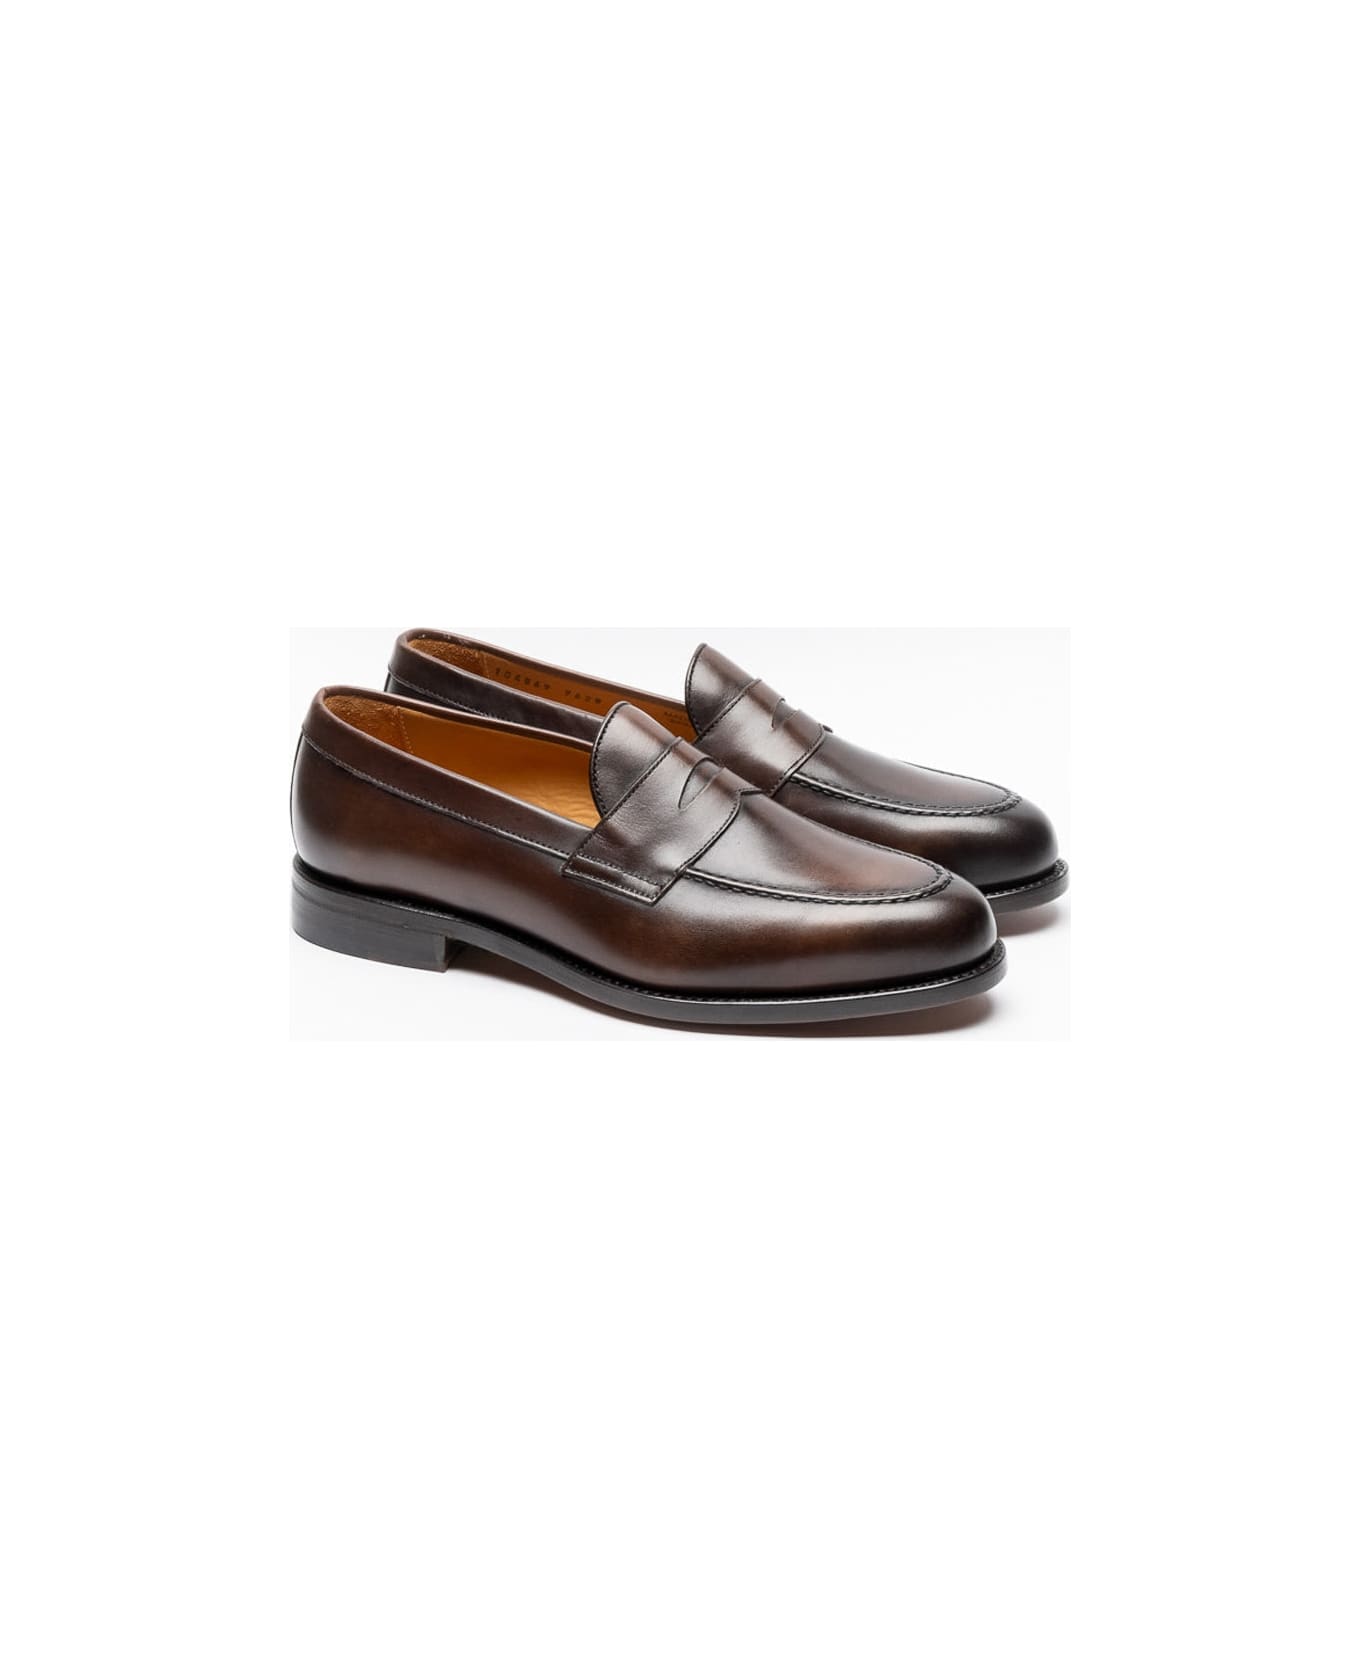 Berwick 1707 Brown Polished Leather Loafer - Marrone ローファー＆デッキシューズ